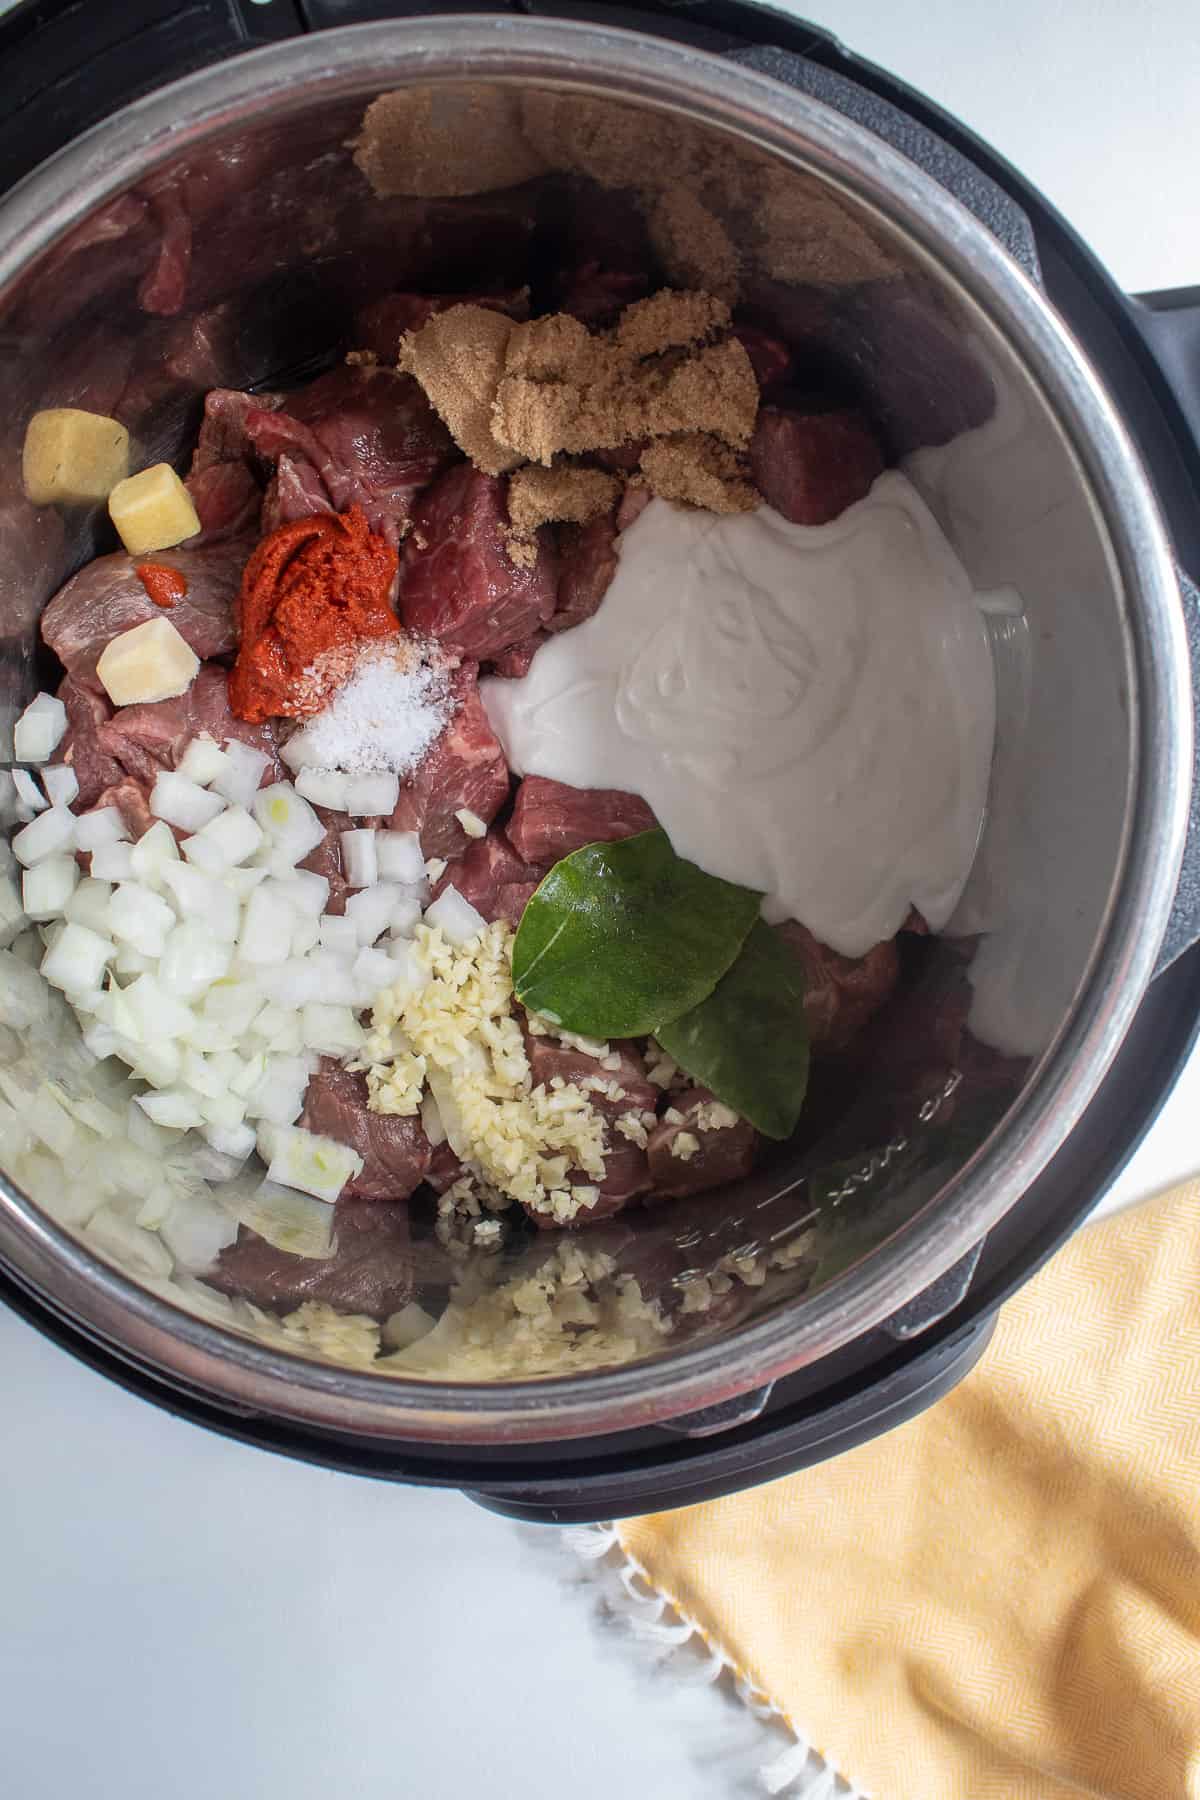 The ingredients for the beef are loaded into the Instant Pot.